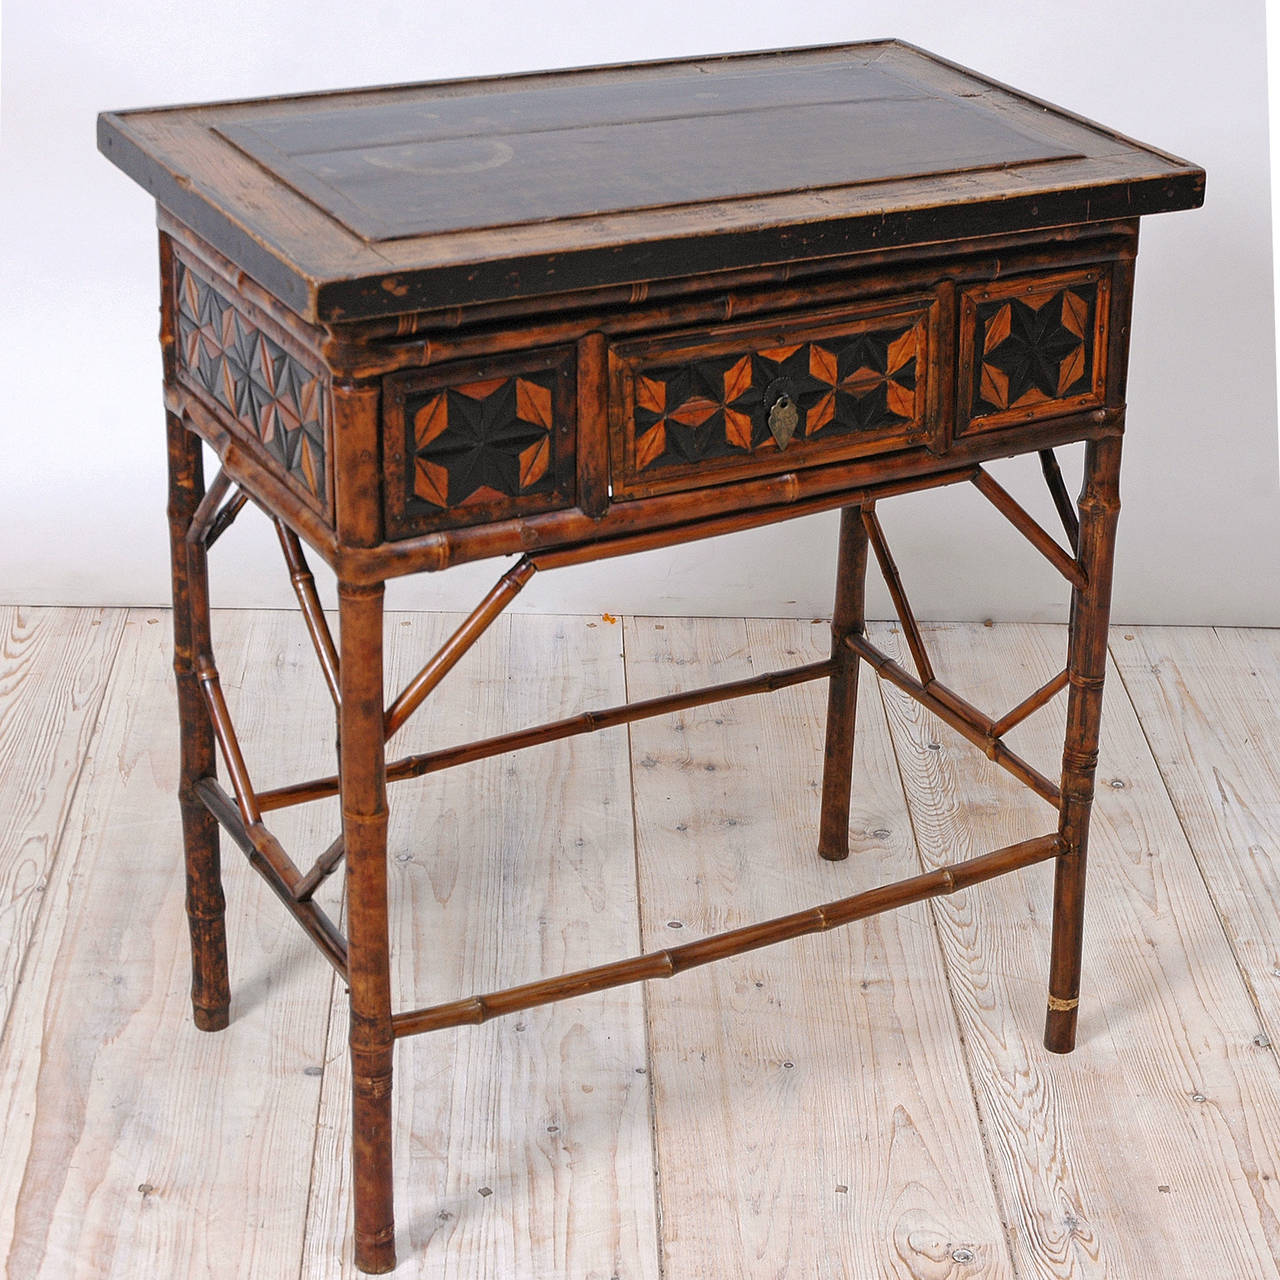 A very unusual and beautiful table in bamboo embellished with a geometric design in various wood inlays along the apron and fascia of drawer. Top is inset with a japanned section of wood. Continental Europe, circa early to mid-1700s.

Measures: